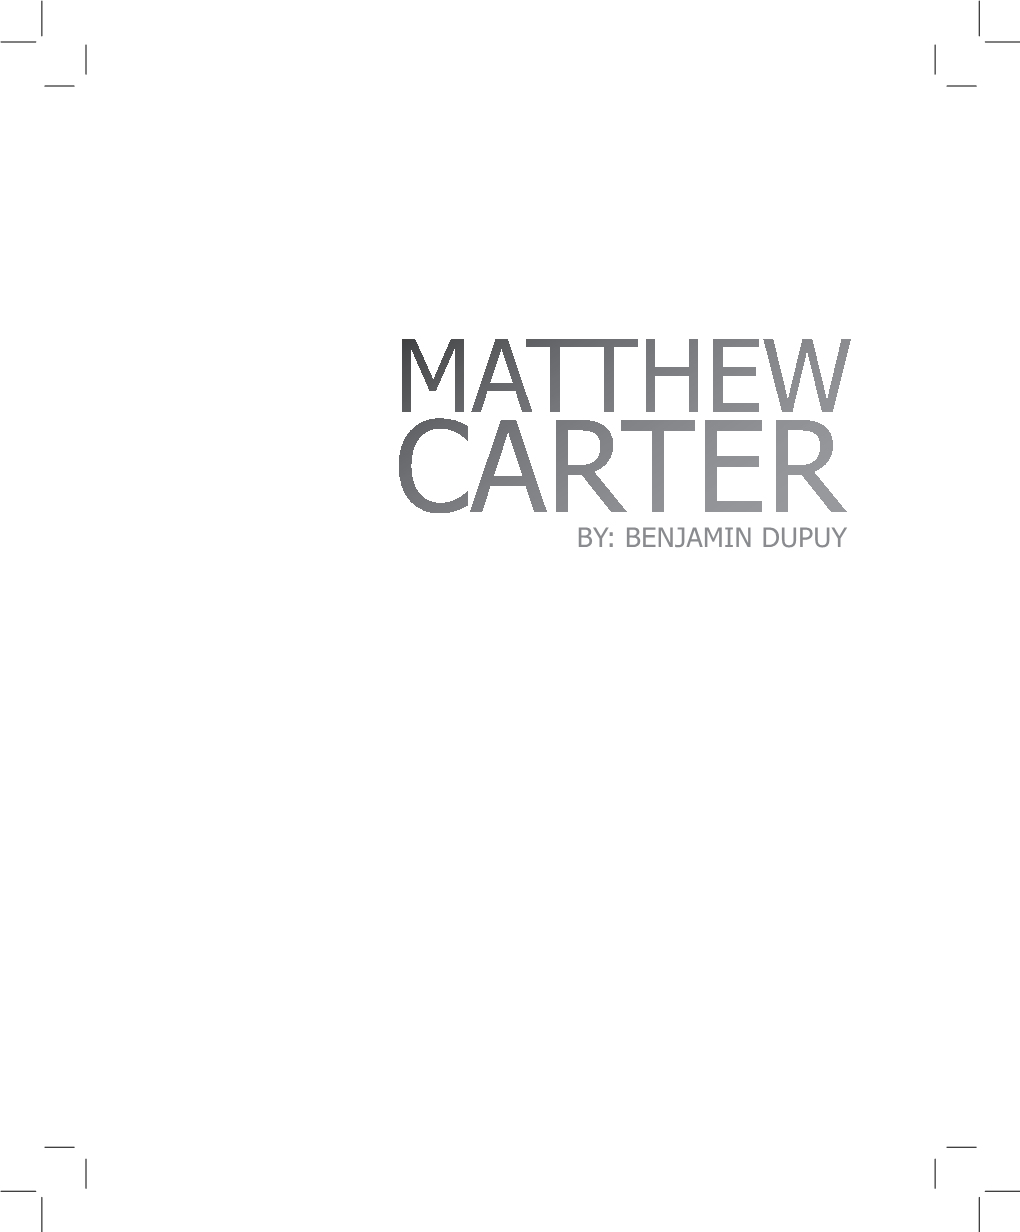 CARTER BY: BENJAMIN DUPUY Published by Dupuy Designs Company, Inc